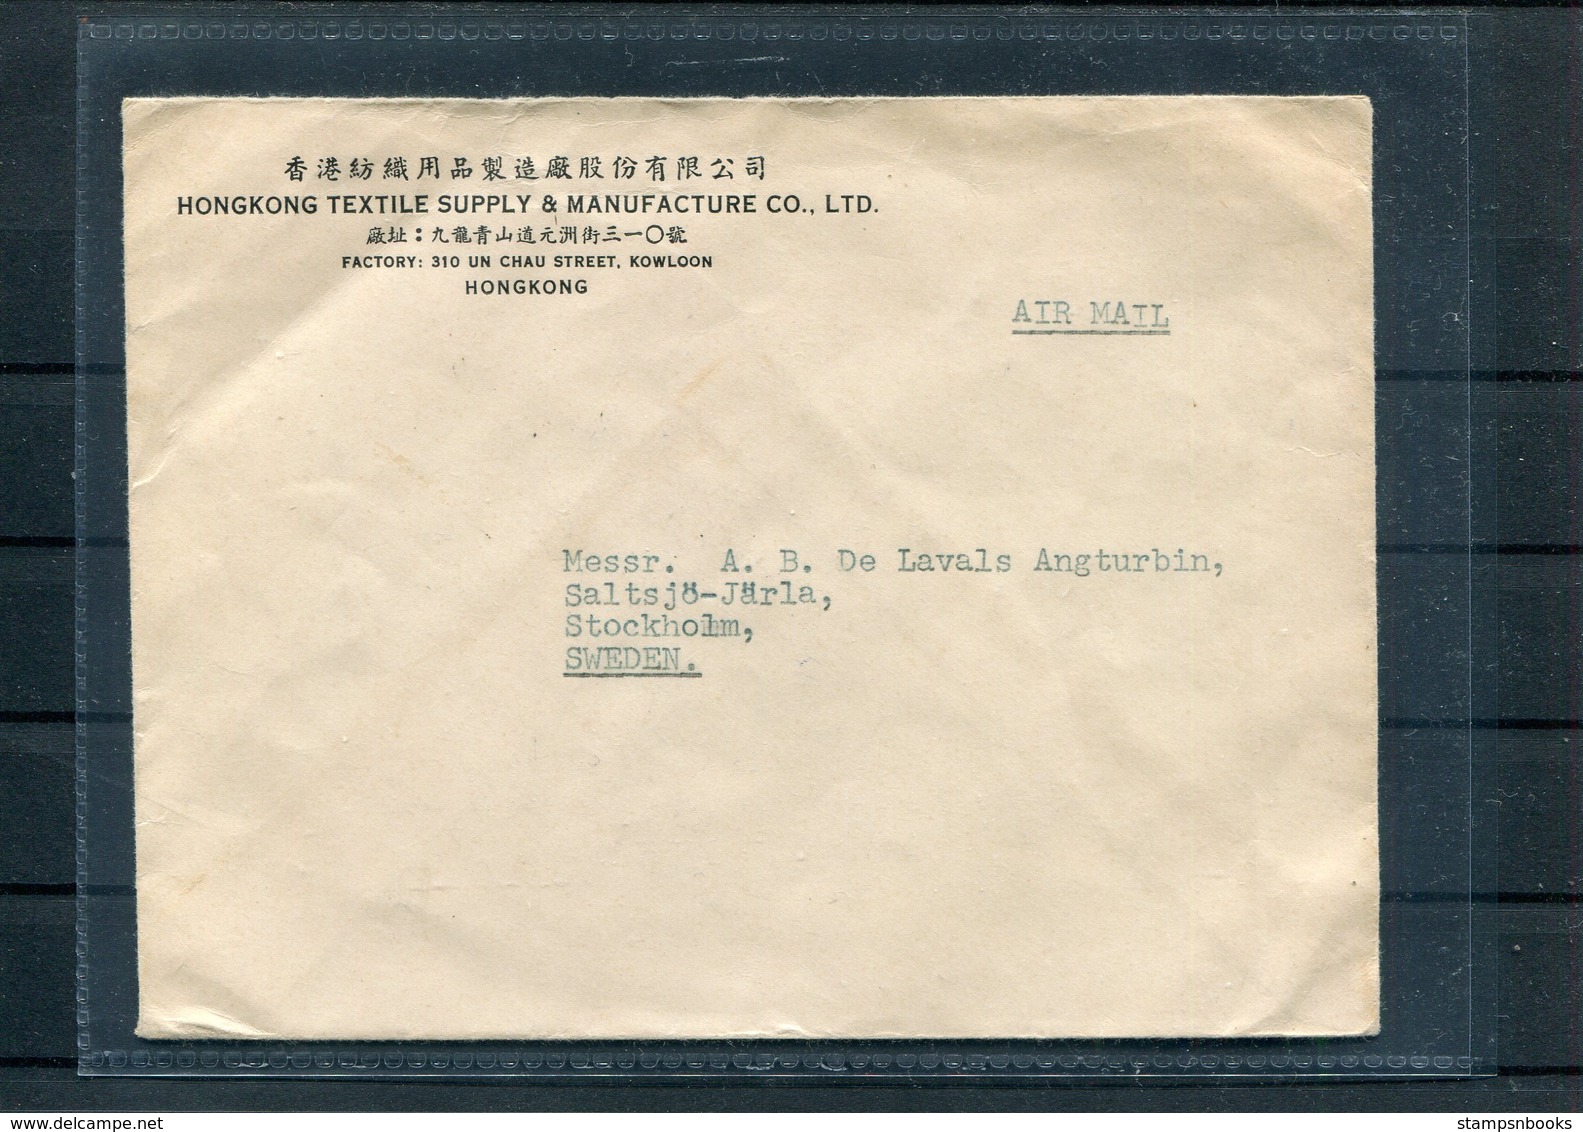 1949 Hong Kong $1.50 Rate Airmail Cover - Stockholm Sweden. - Covers & Documents